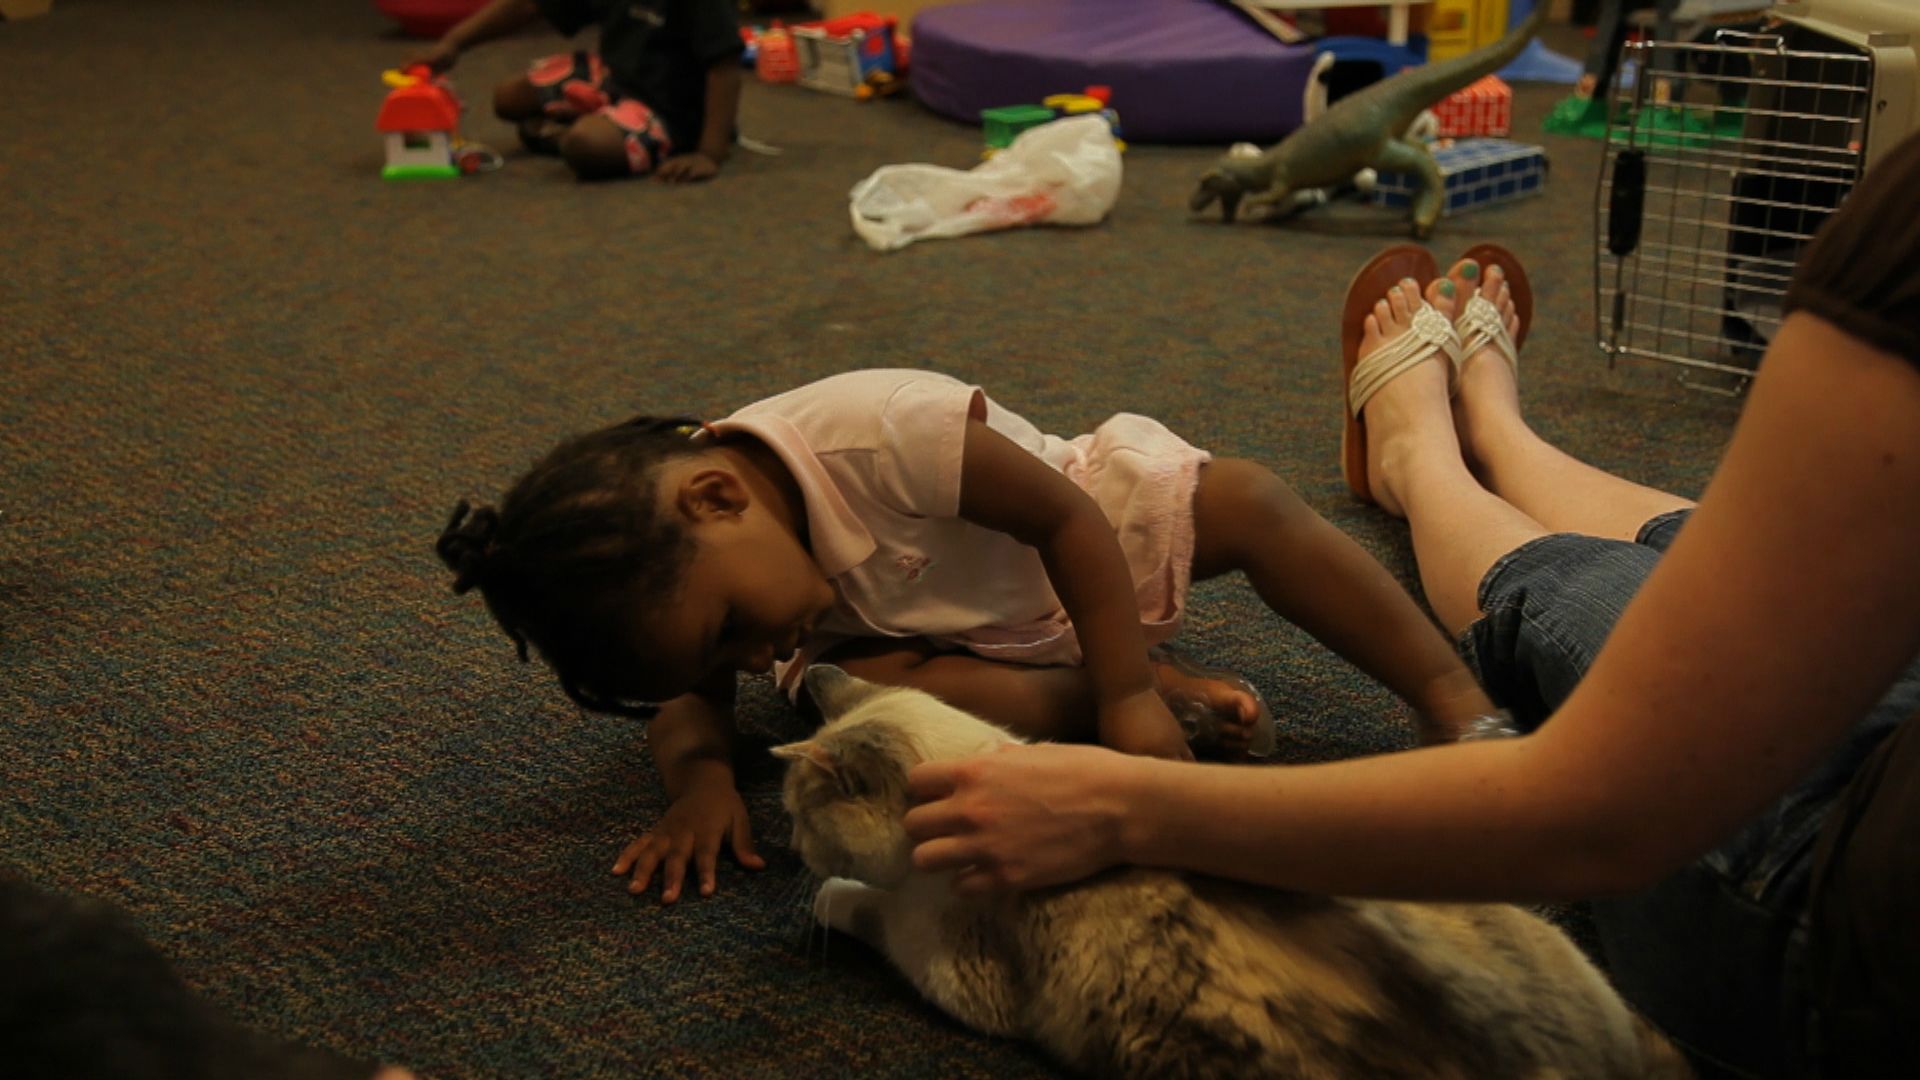 Pets provide love for children in domestic abuse shelter